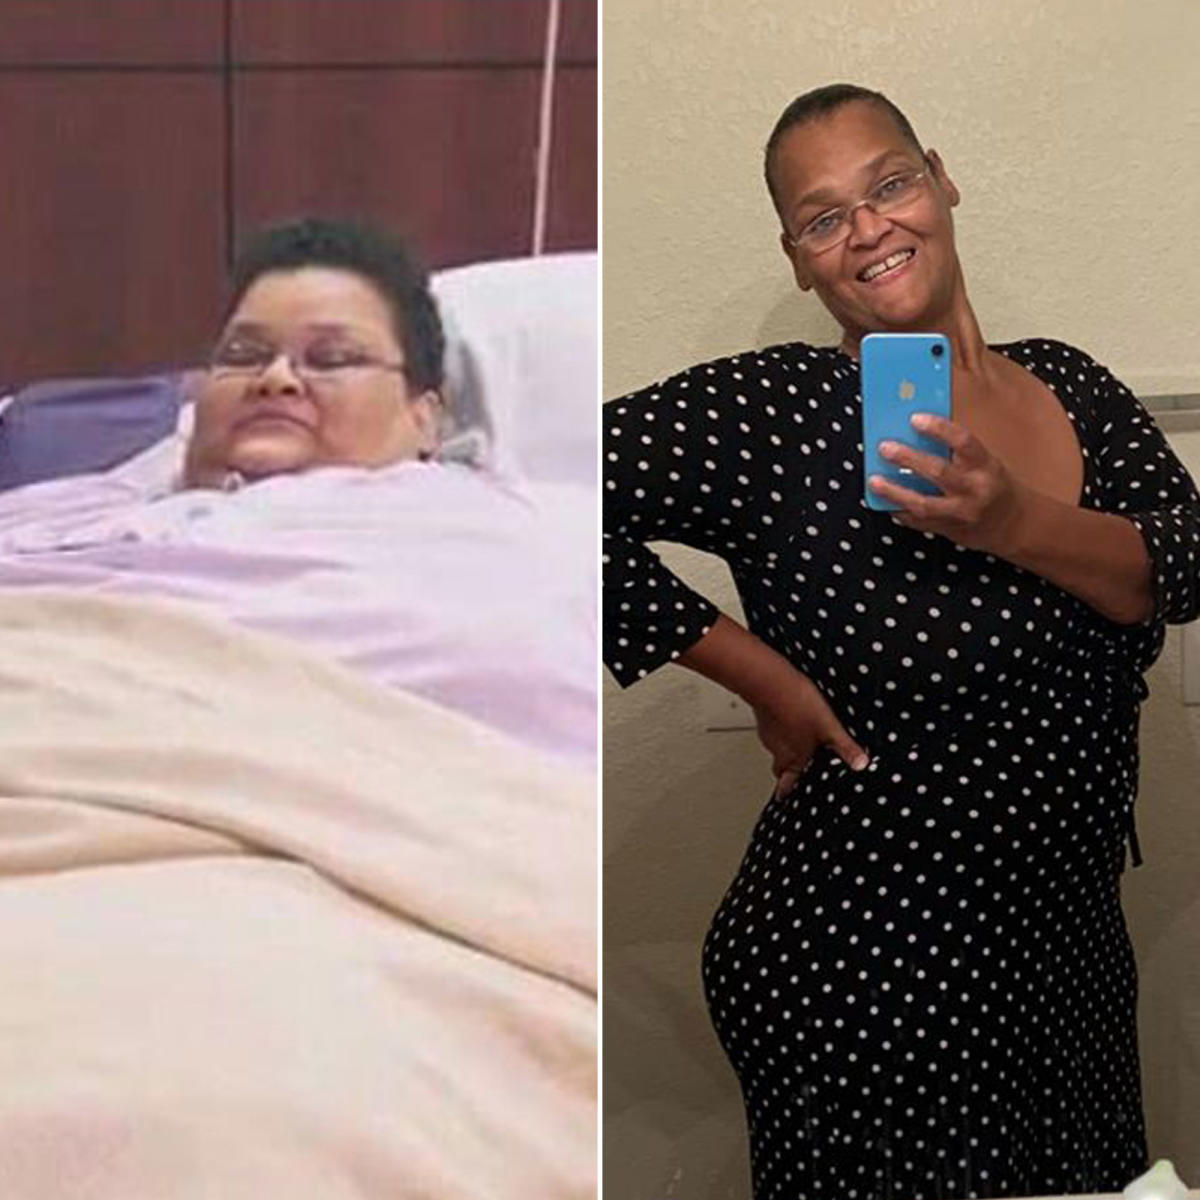 The Truth About Dr. Now's Famous Diet Plan For My 600-Lb Life